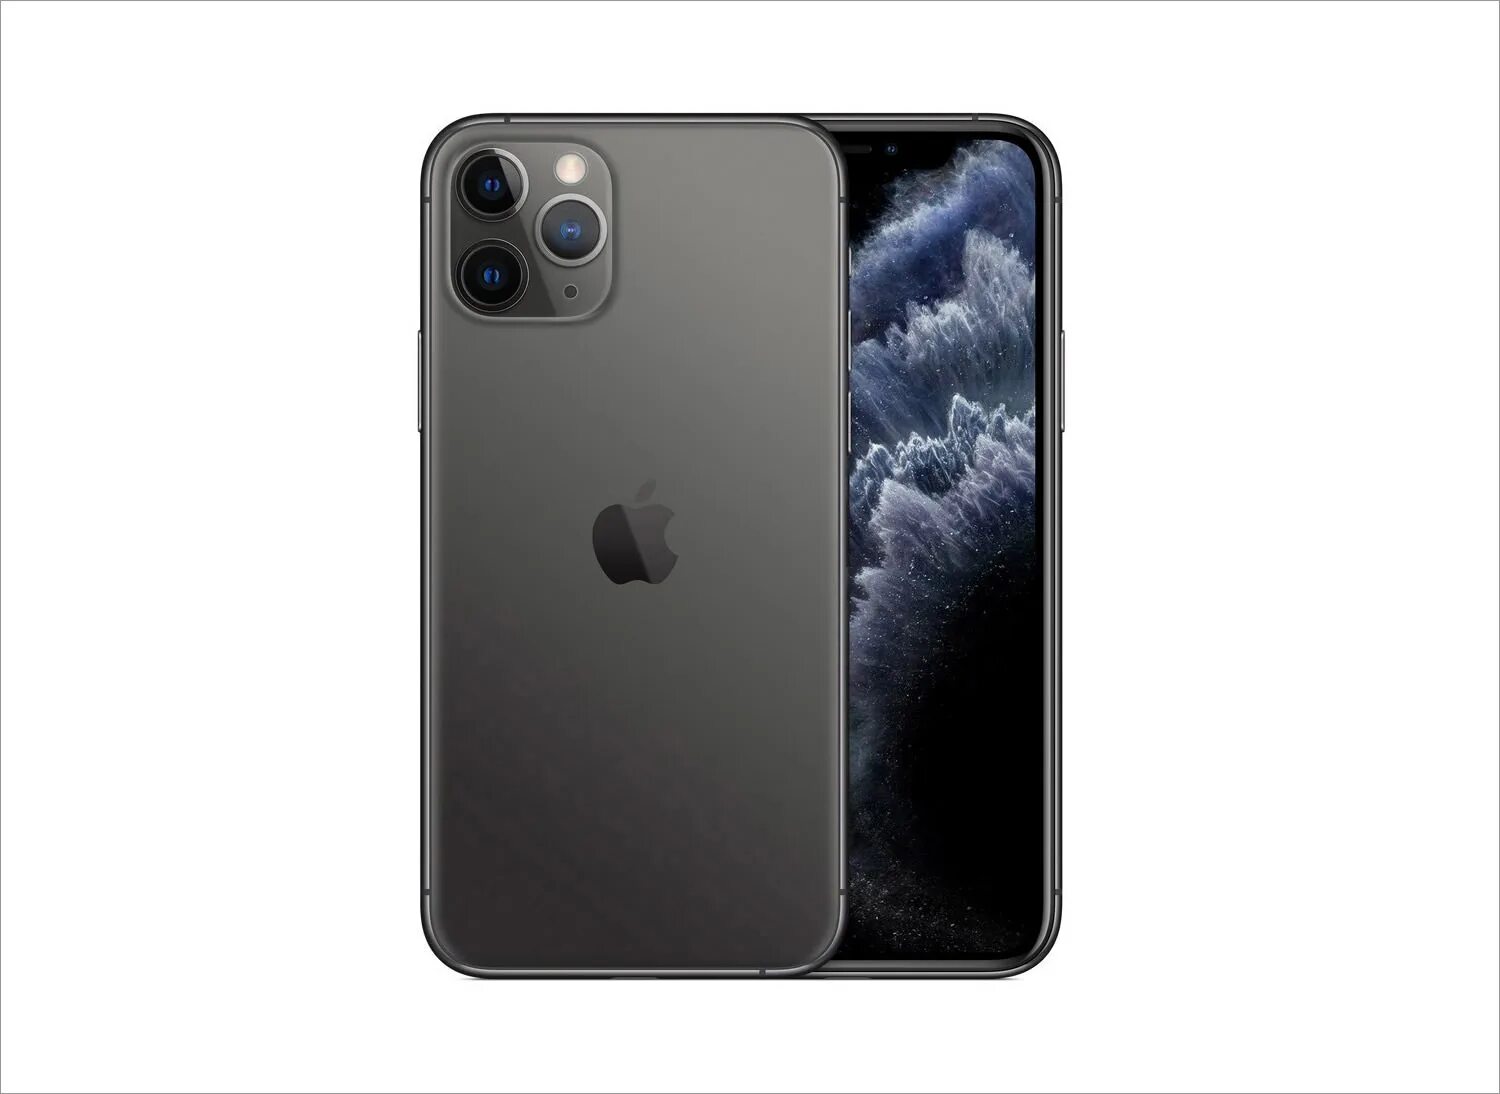 Iphone 11 Pro Max 256gb. Iphone 11 Pro Space Gray. Iphone 11 Pro Max Space Gray 64gb. Iphone 11 Pro Max 128gb.